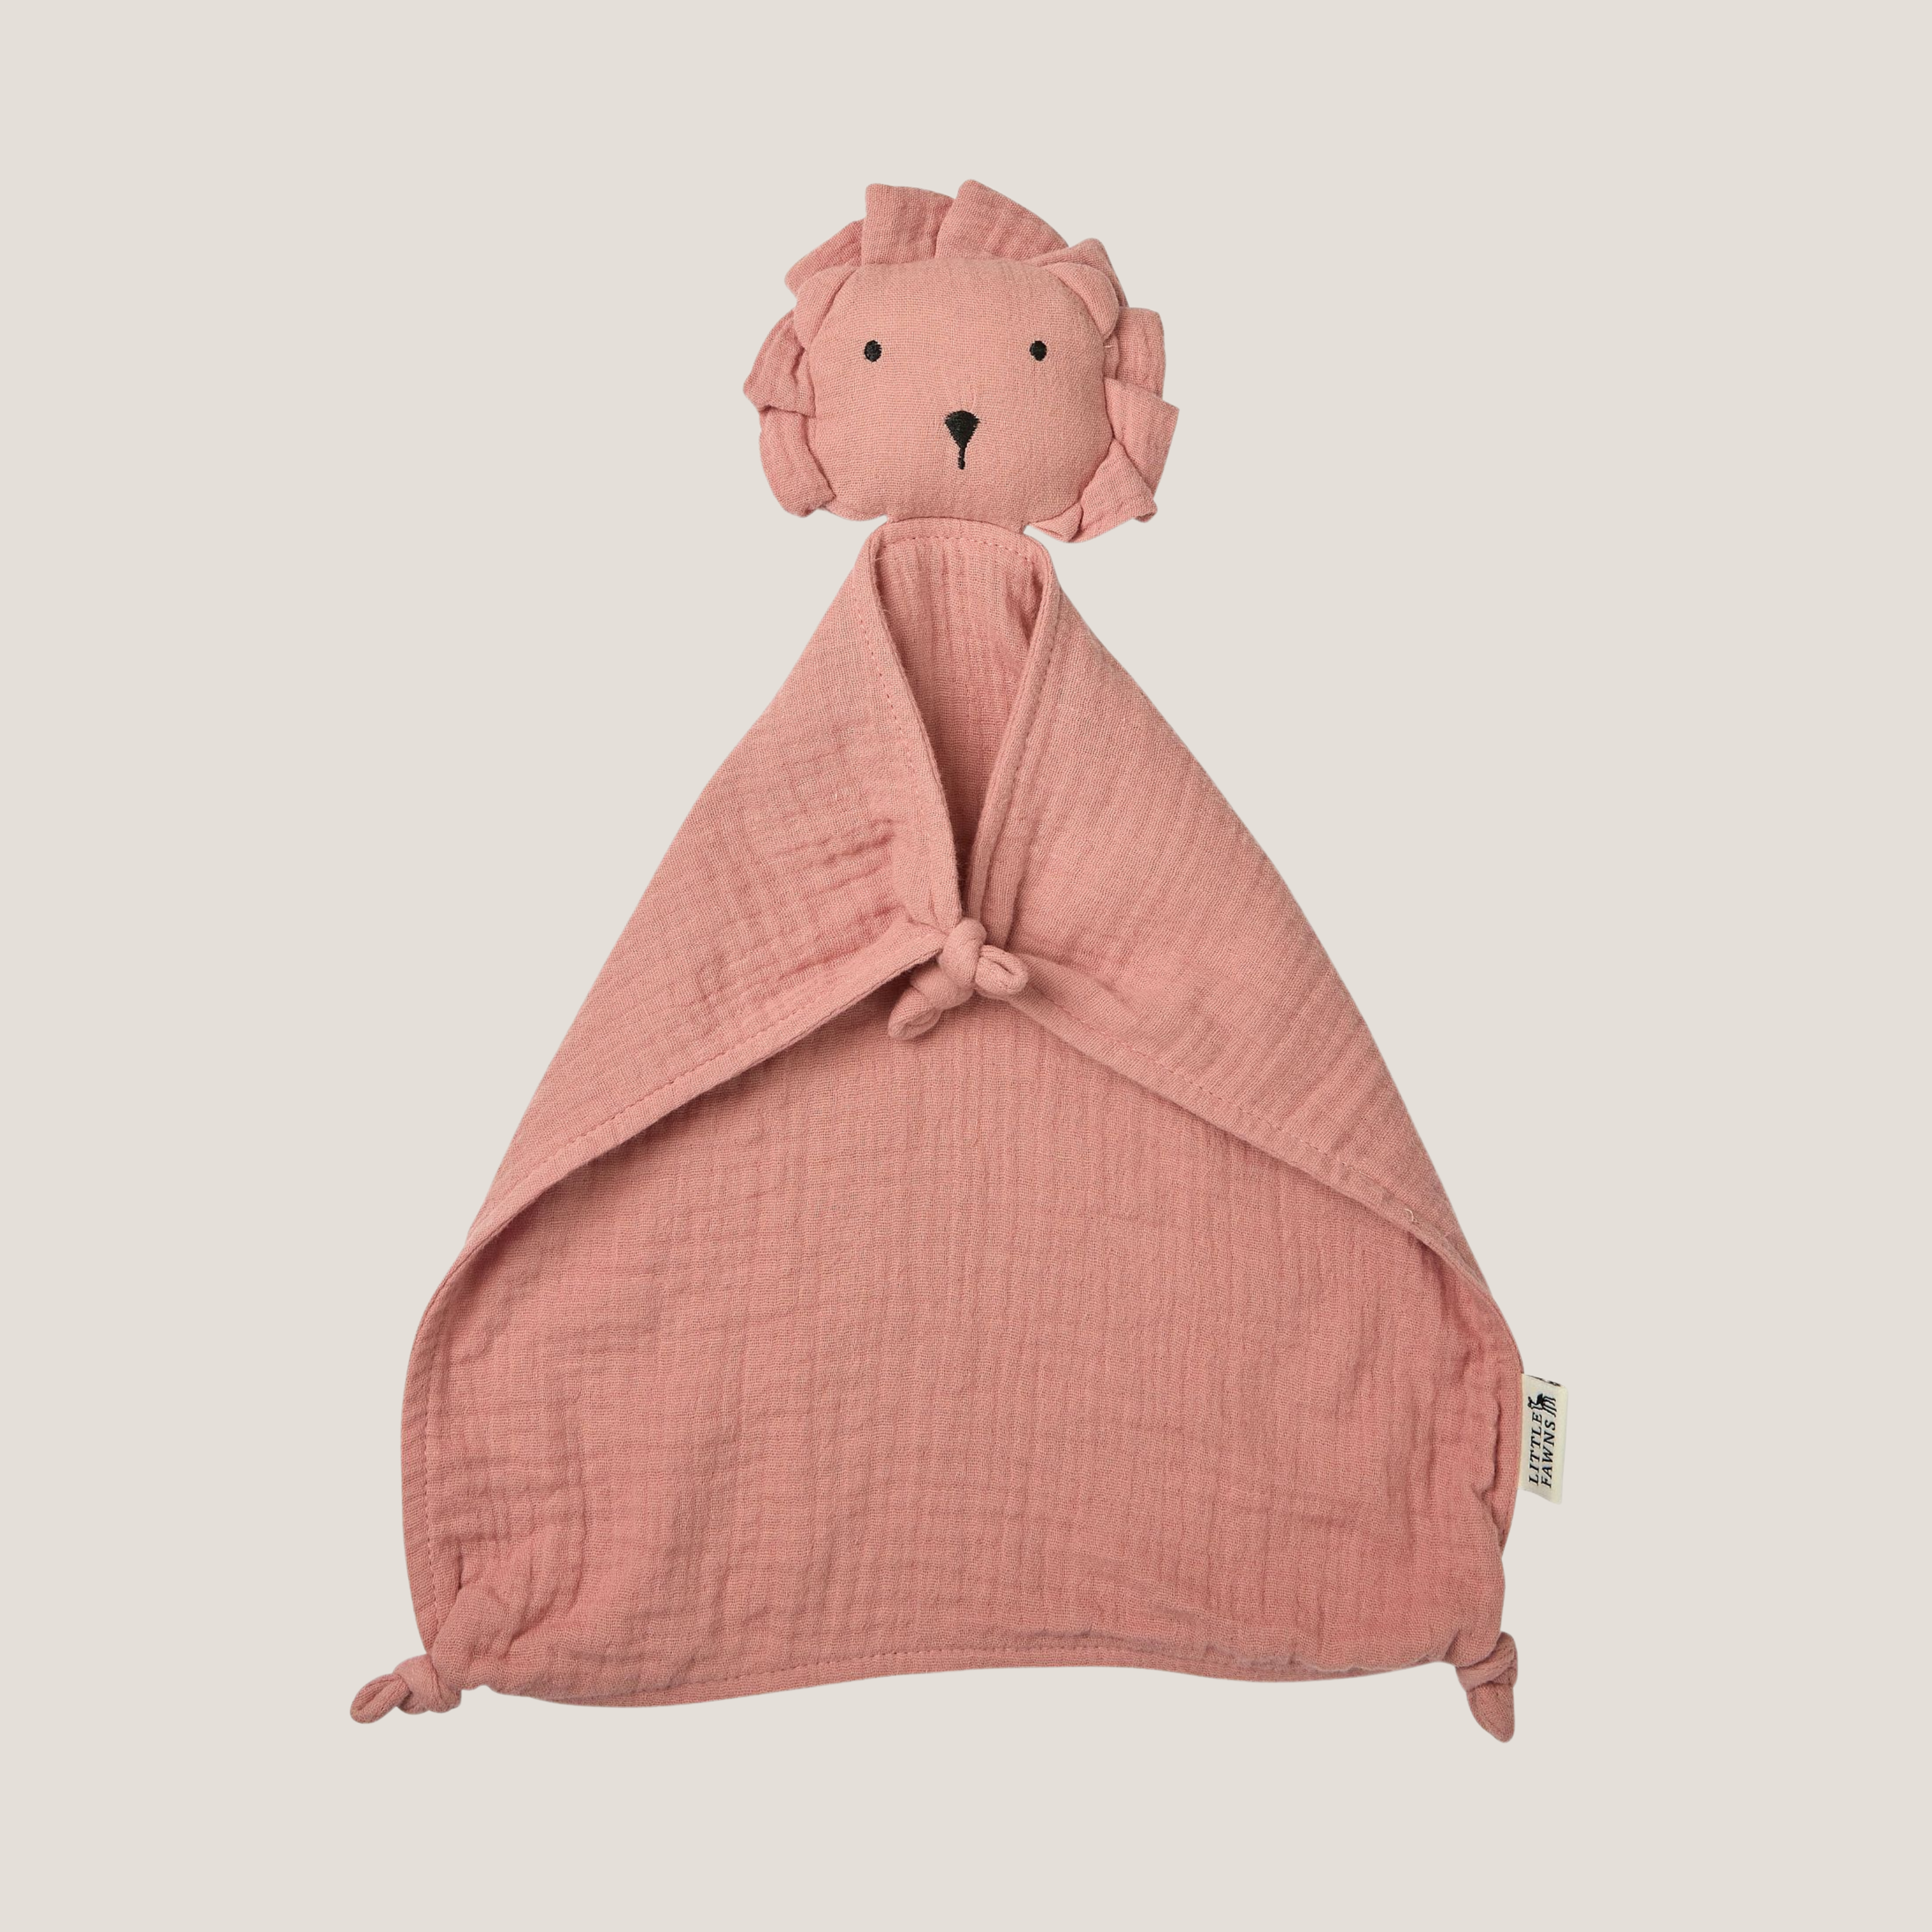 Snuggly Leo Comforter in Dusty Pink